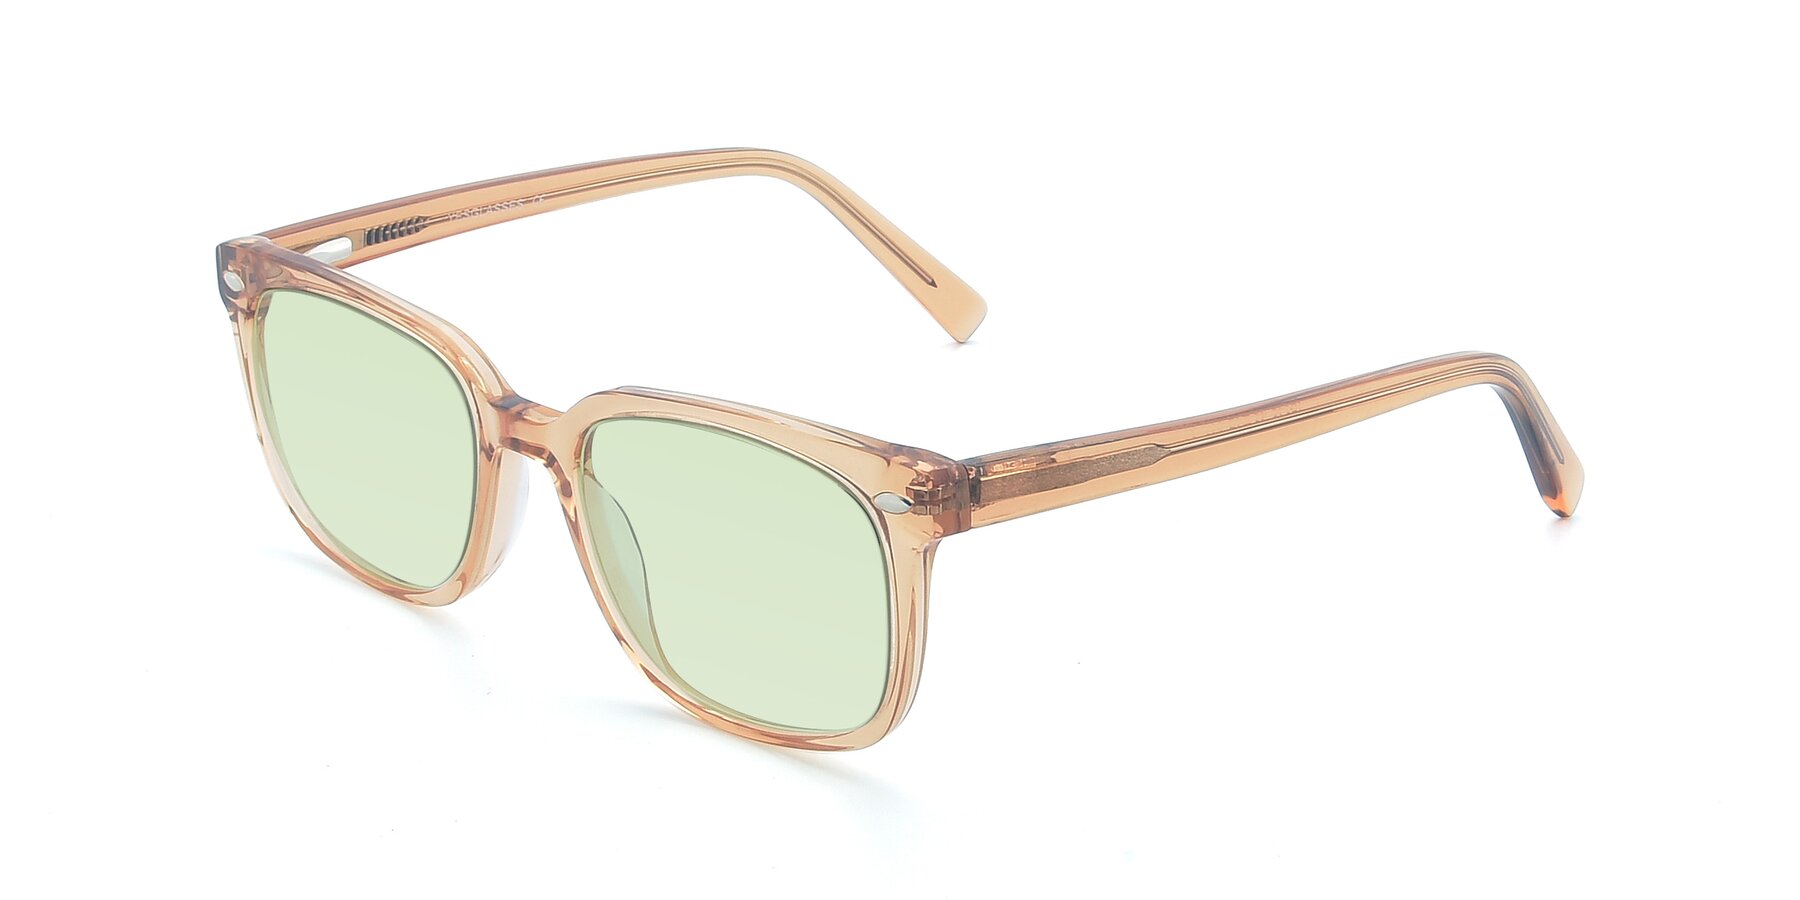 Angle of 17349 in Transparent Caramel with Light Green Tinted Lenses